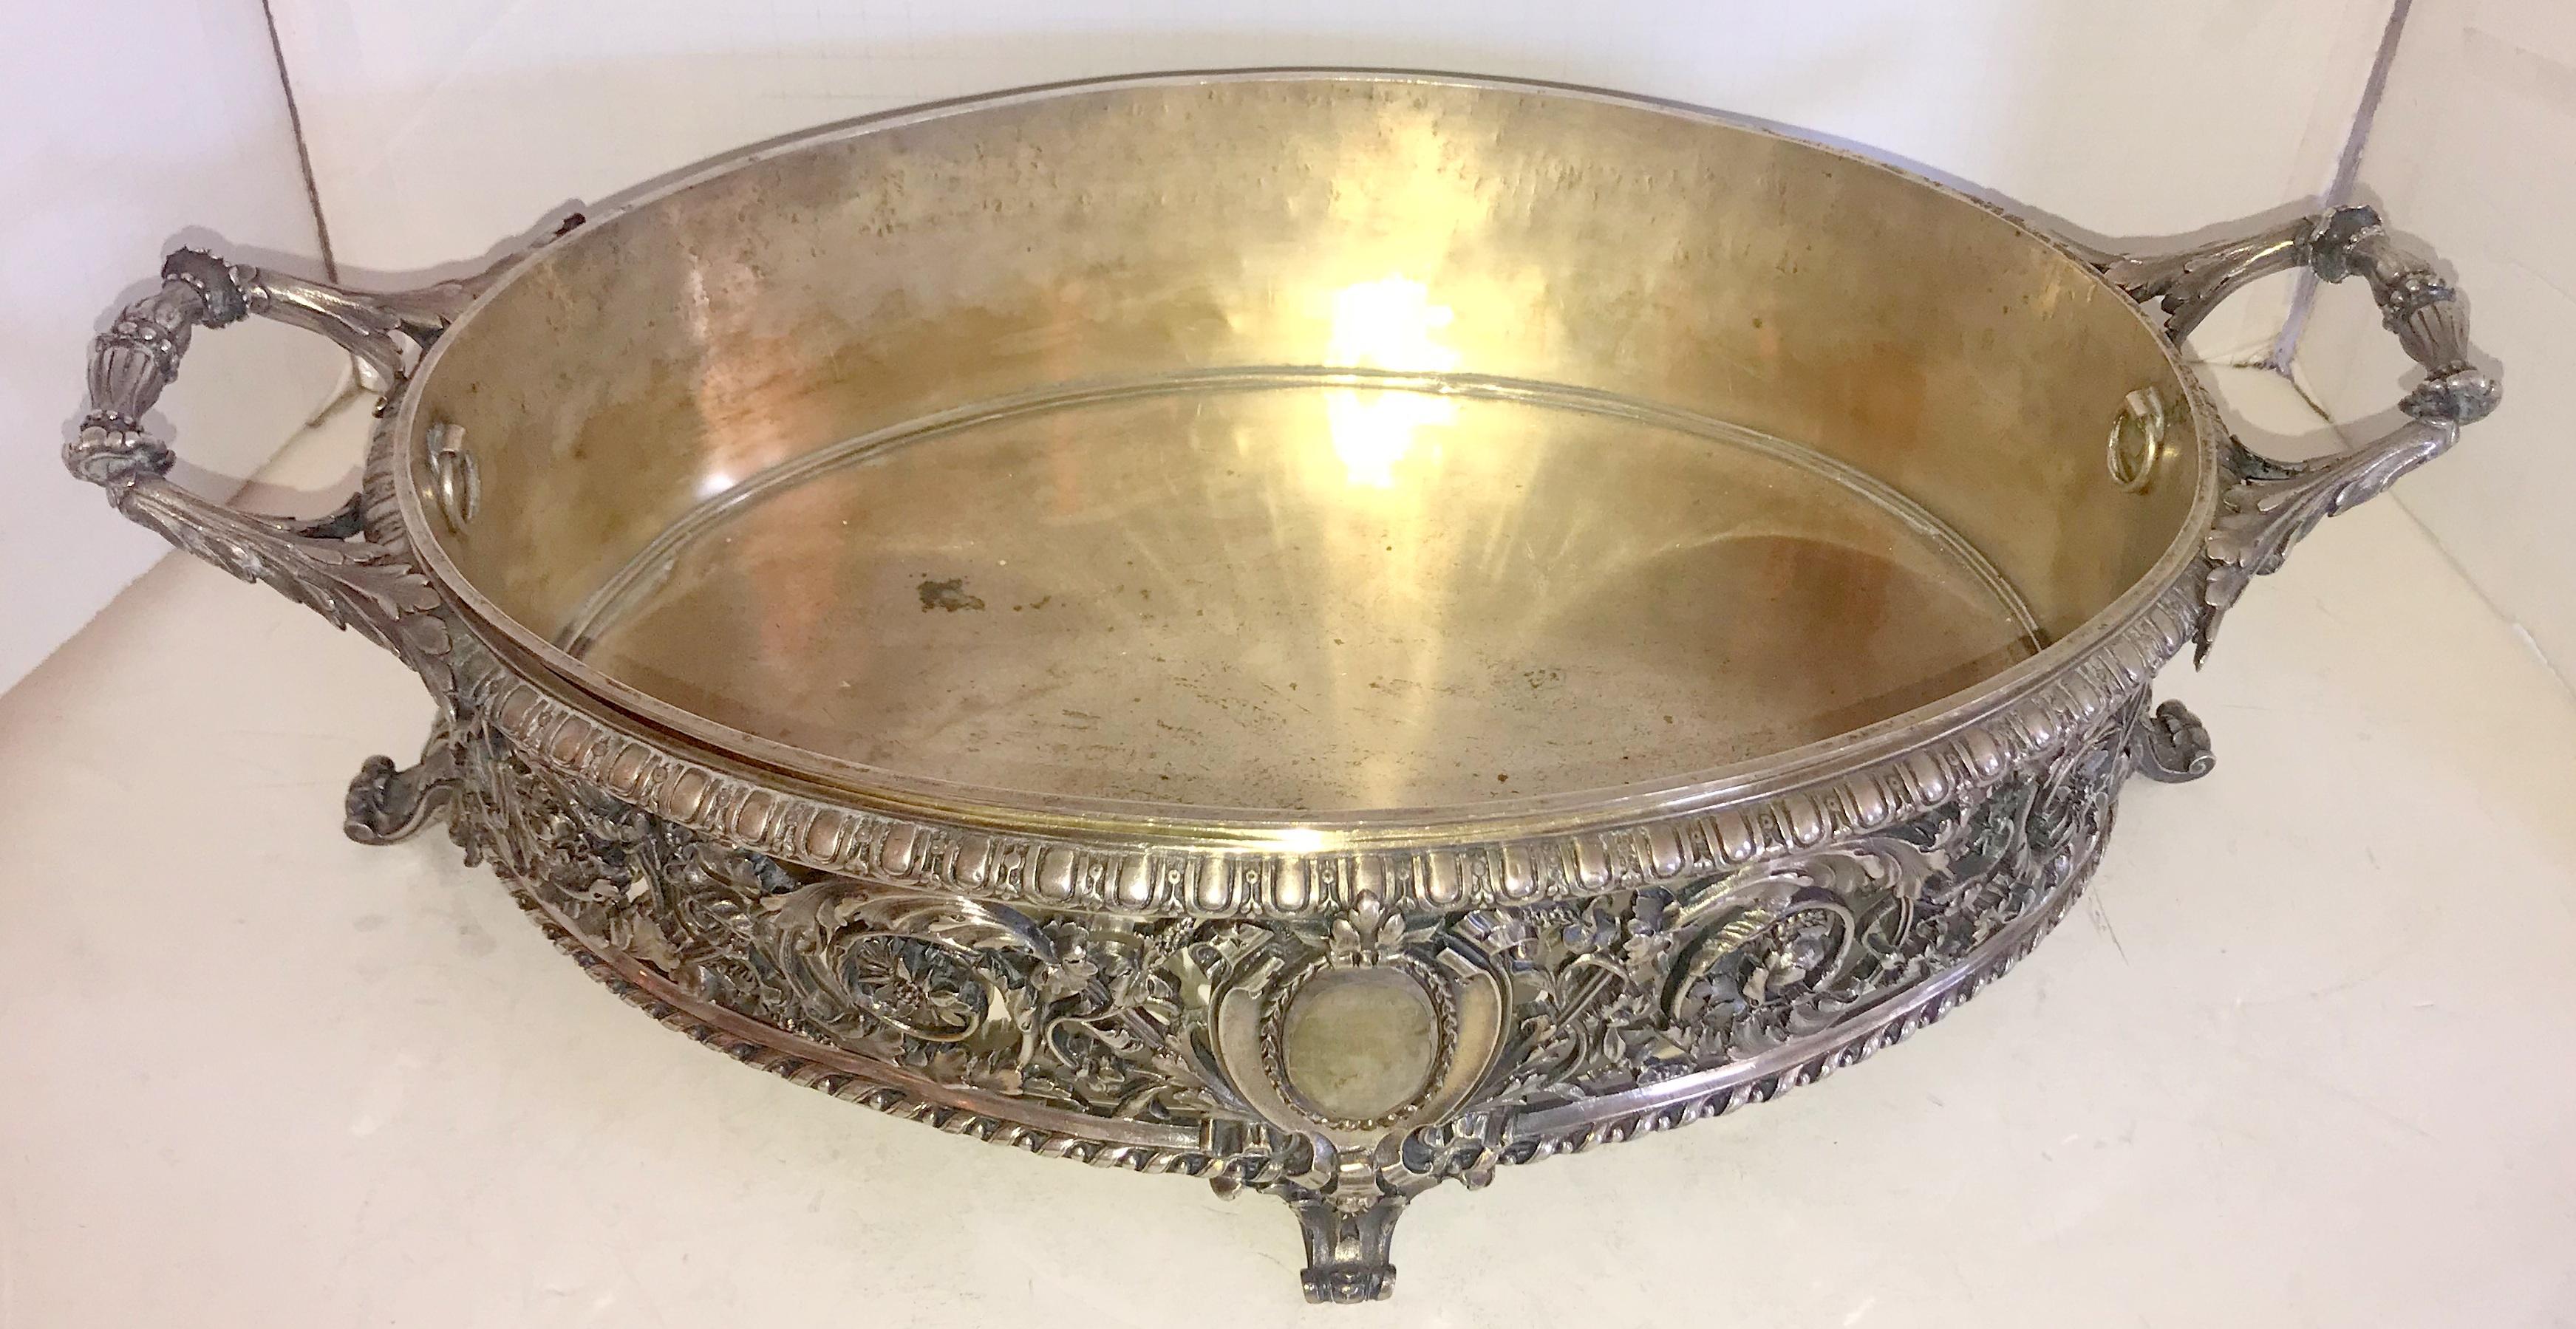 A wonderful French silver plated over bronze centrepiece with insert by Christofle, this beautiful centrepiece is adorned with filigree and pierced design and is cantered with a crest ending on either side with very fine detailed handles and raised